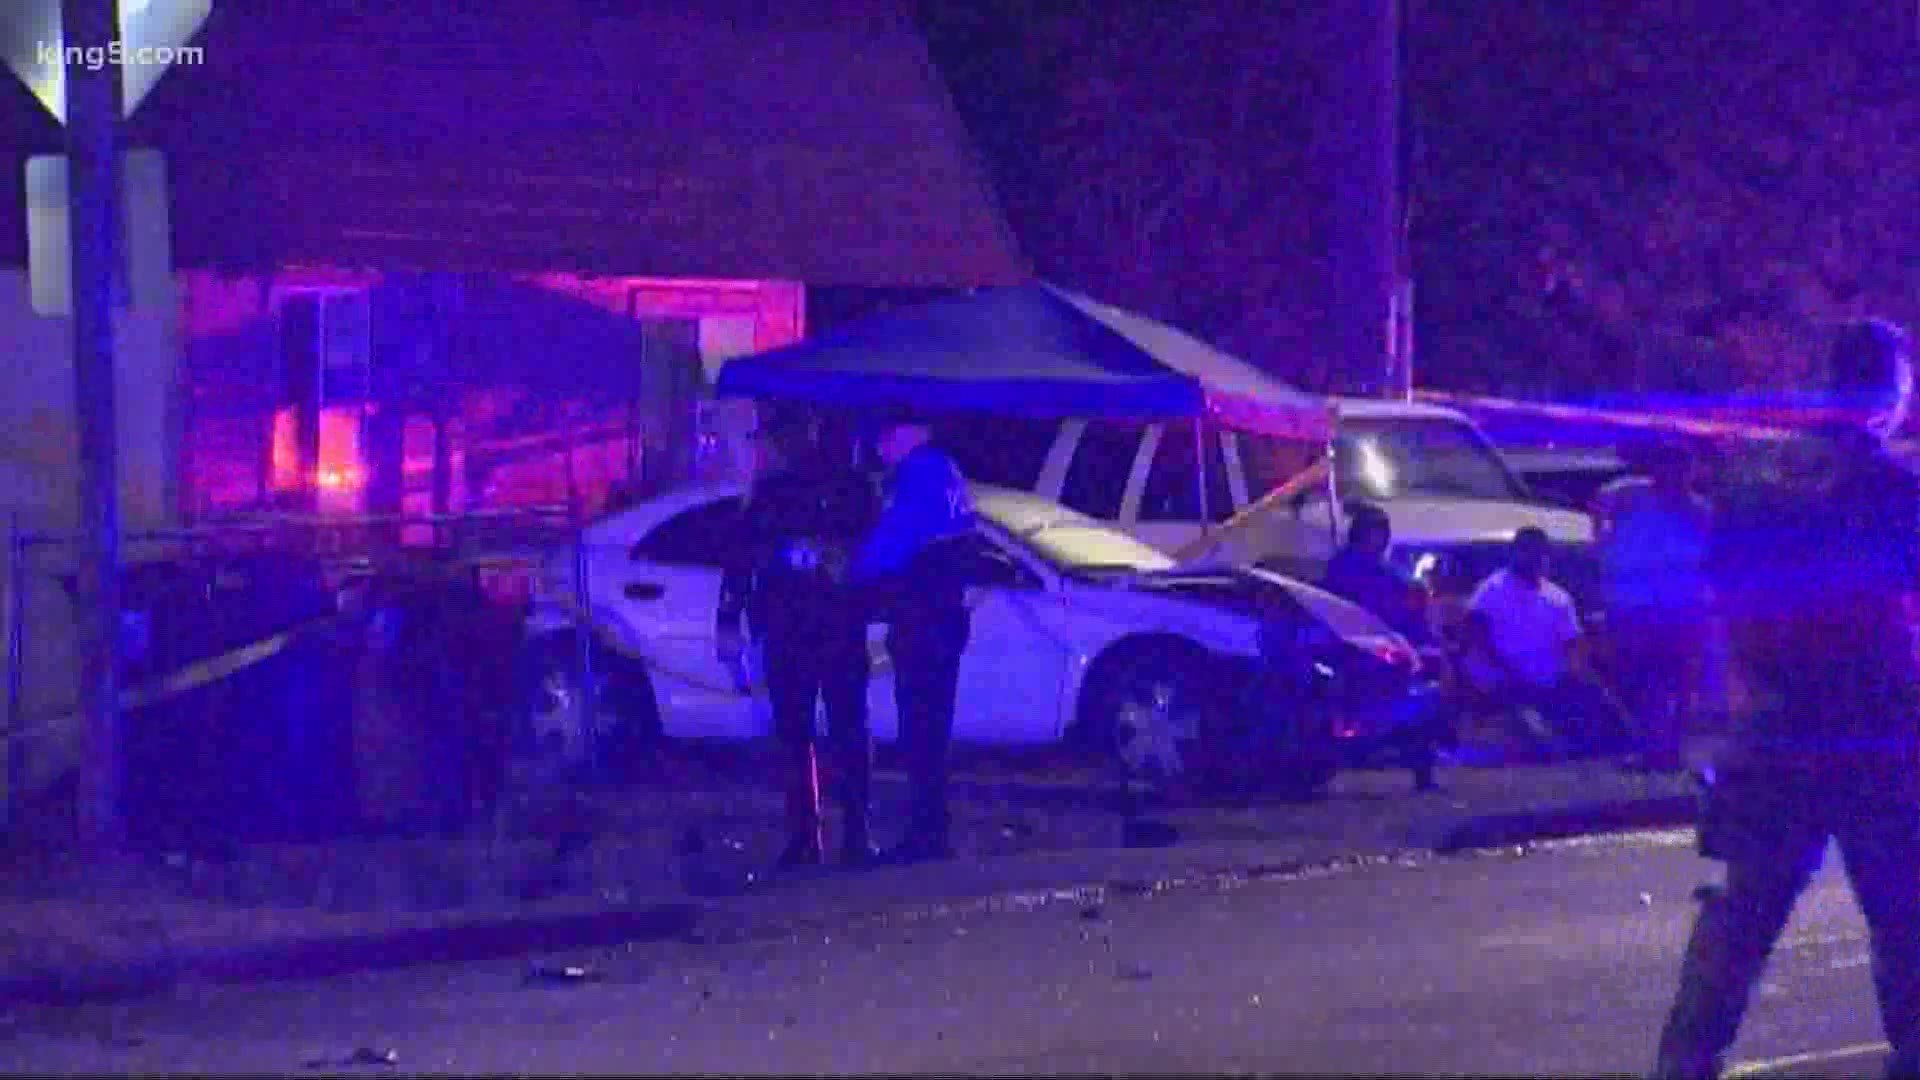 Two people are dead after a speeding car crashed into a parked car in Tacoma’s Fern Hill neighborhood late Thursday night.